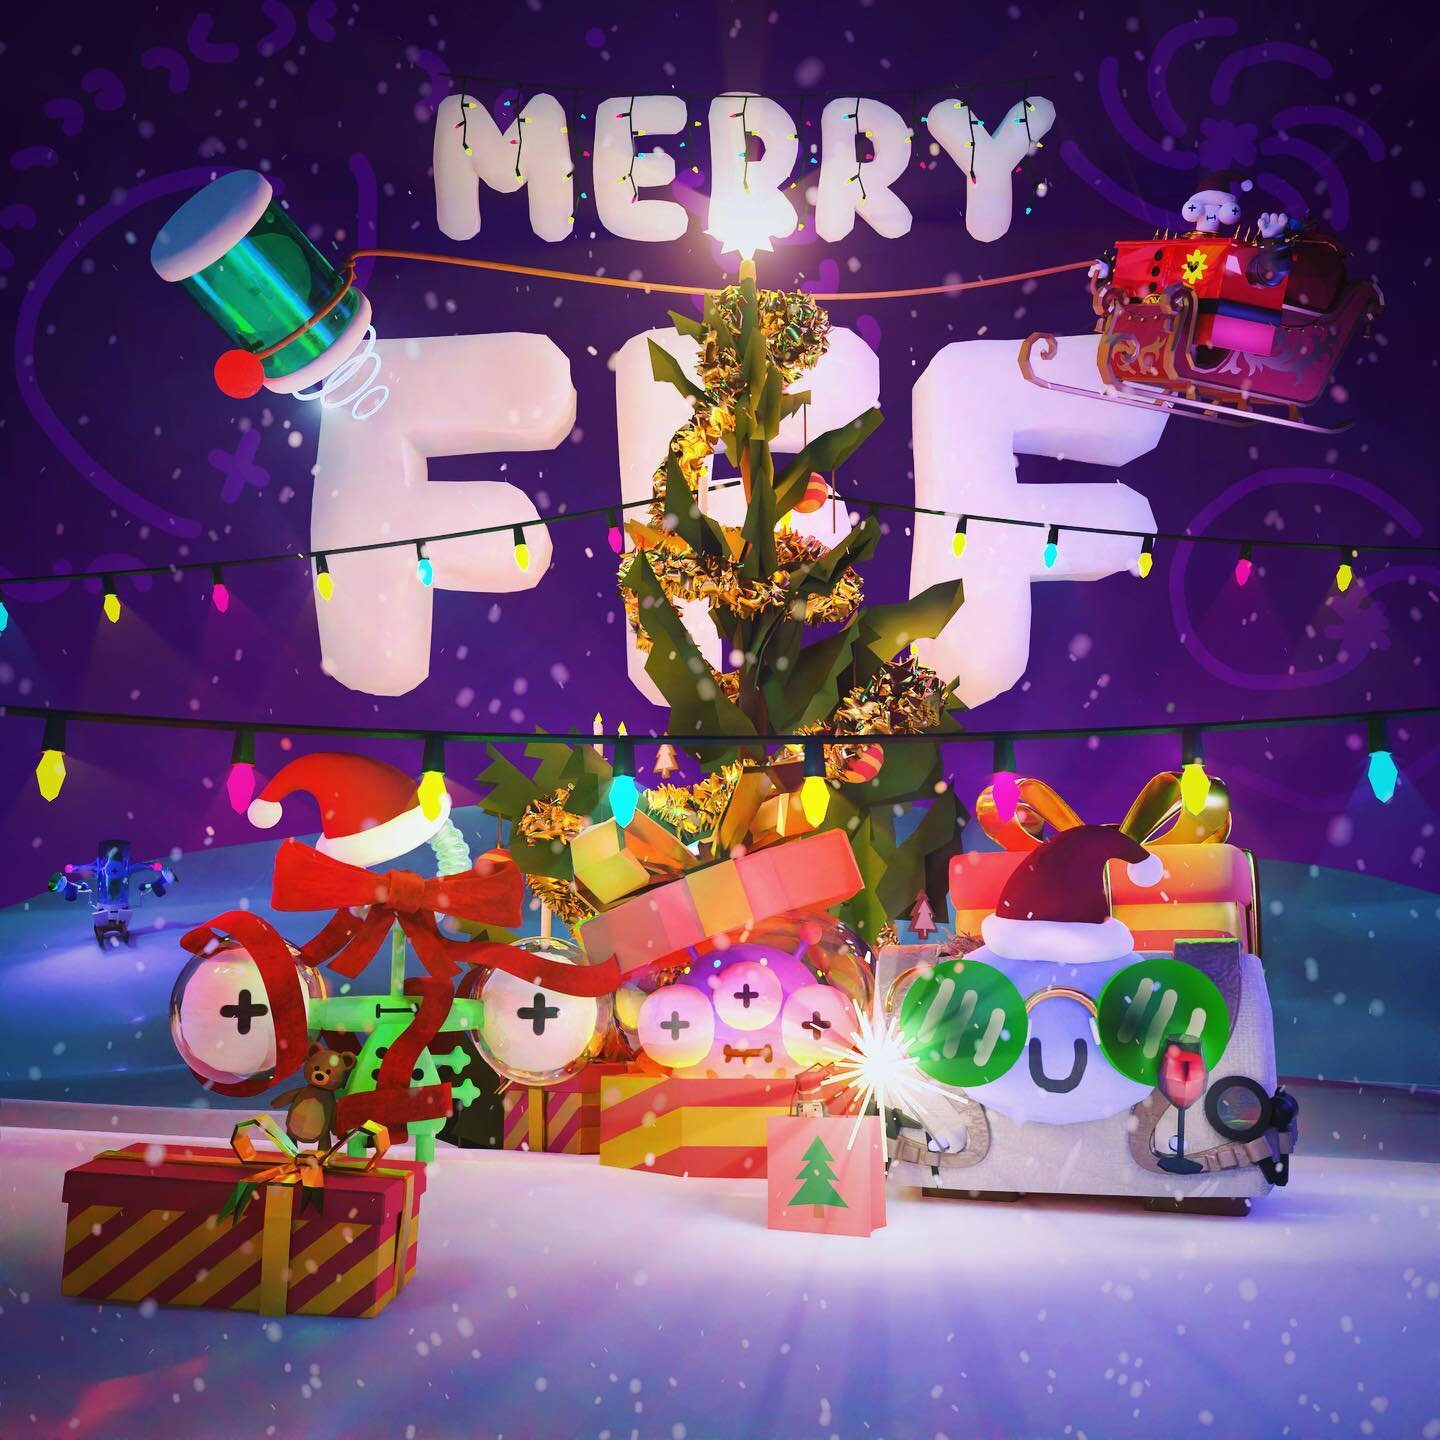 Merry FFF Christmas and Happy FFF New Year from the FFF team 🎄

#fffthegame #indiegamedev #polyperfect #lol #idle #illustration #blender3D #unity3D